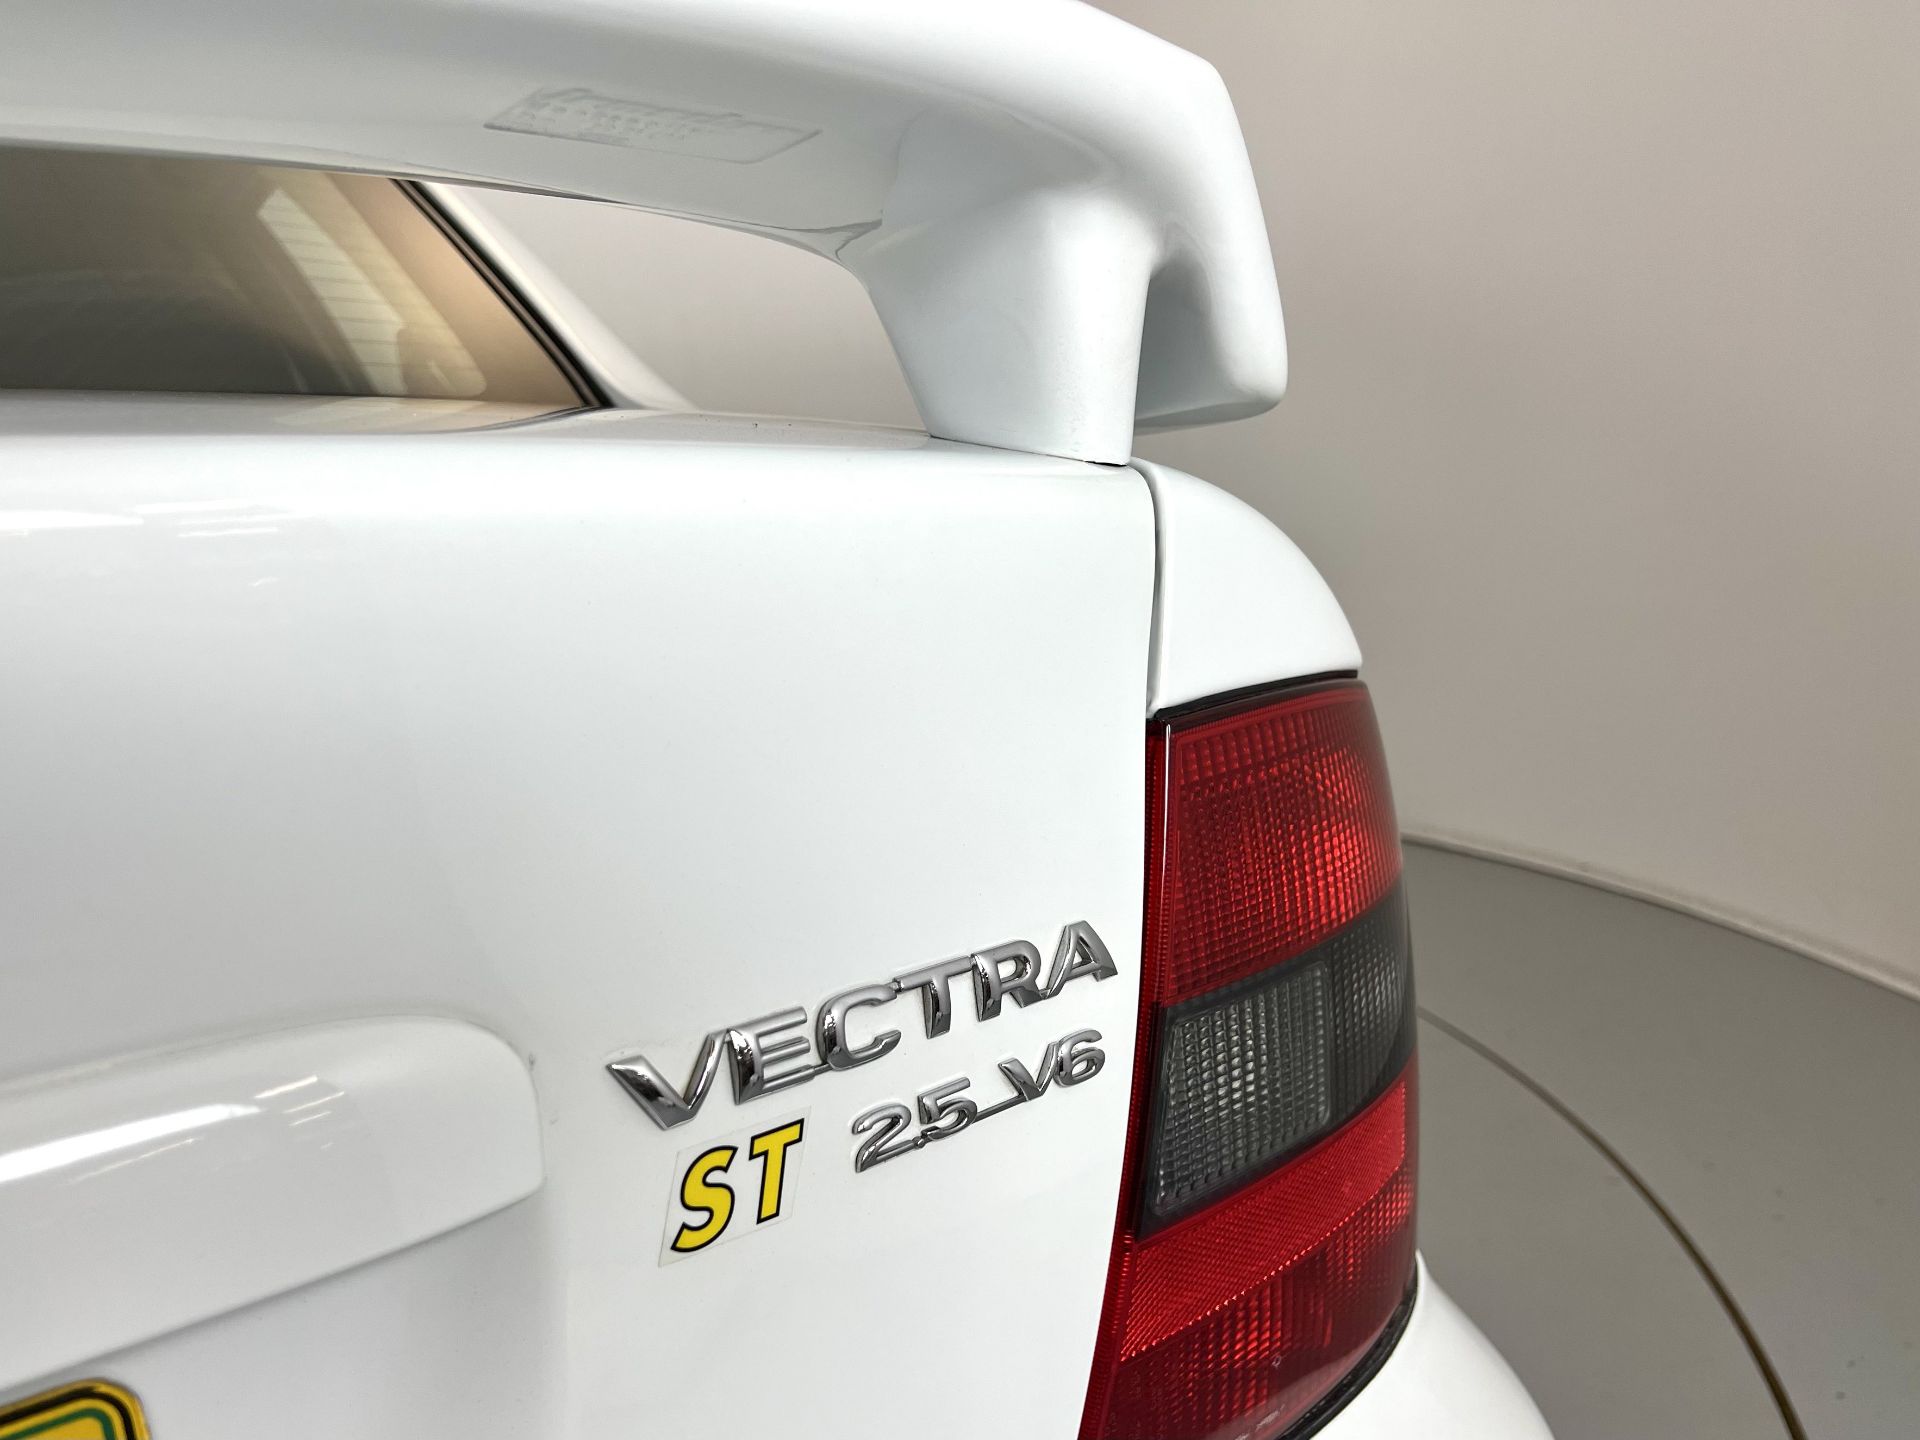 Vauxhall Vectra Supertouring - Image 18 of 36